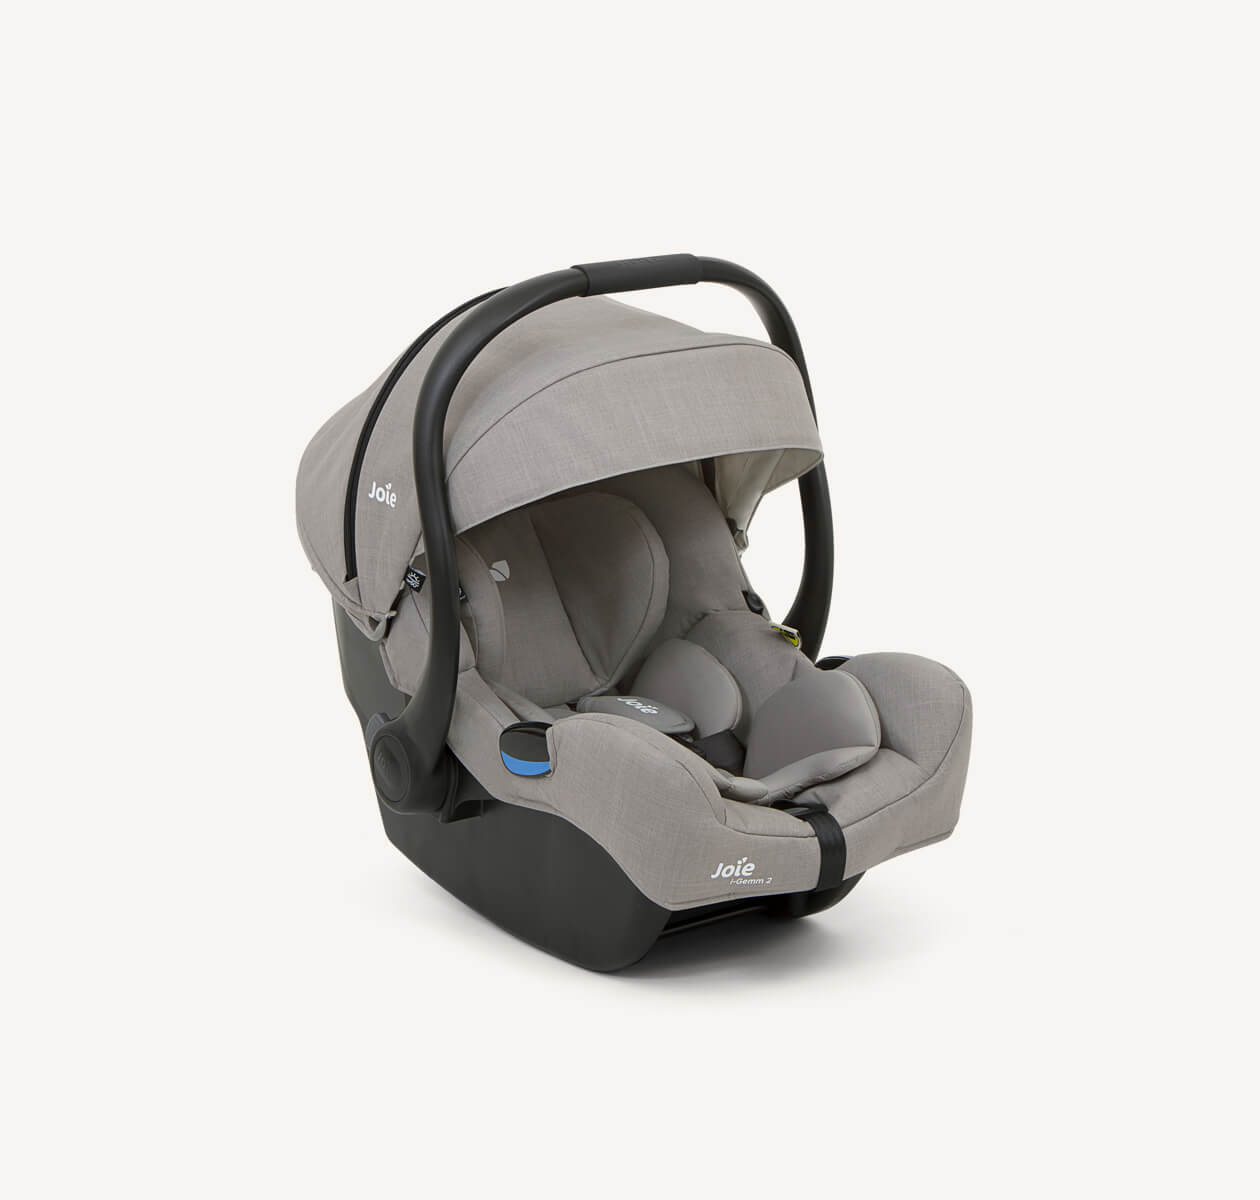 https://dd.joiebaby.com/media/catalog/product/p/1/p1-joie-infant-car-seat-igemm2-pebble-right-angle.jpg?type=product&height=265&width=265